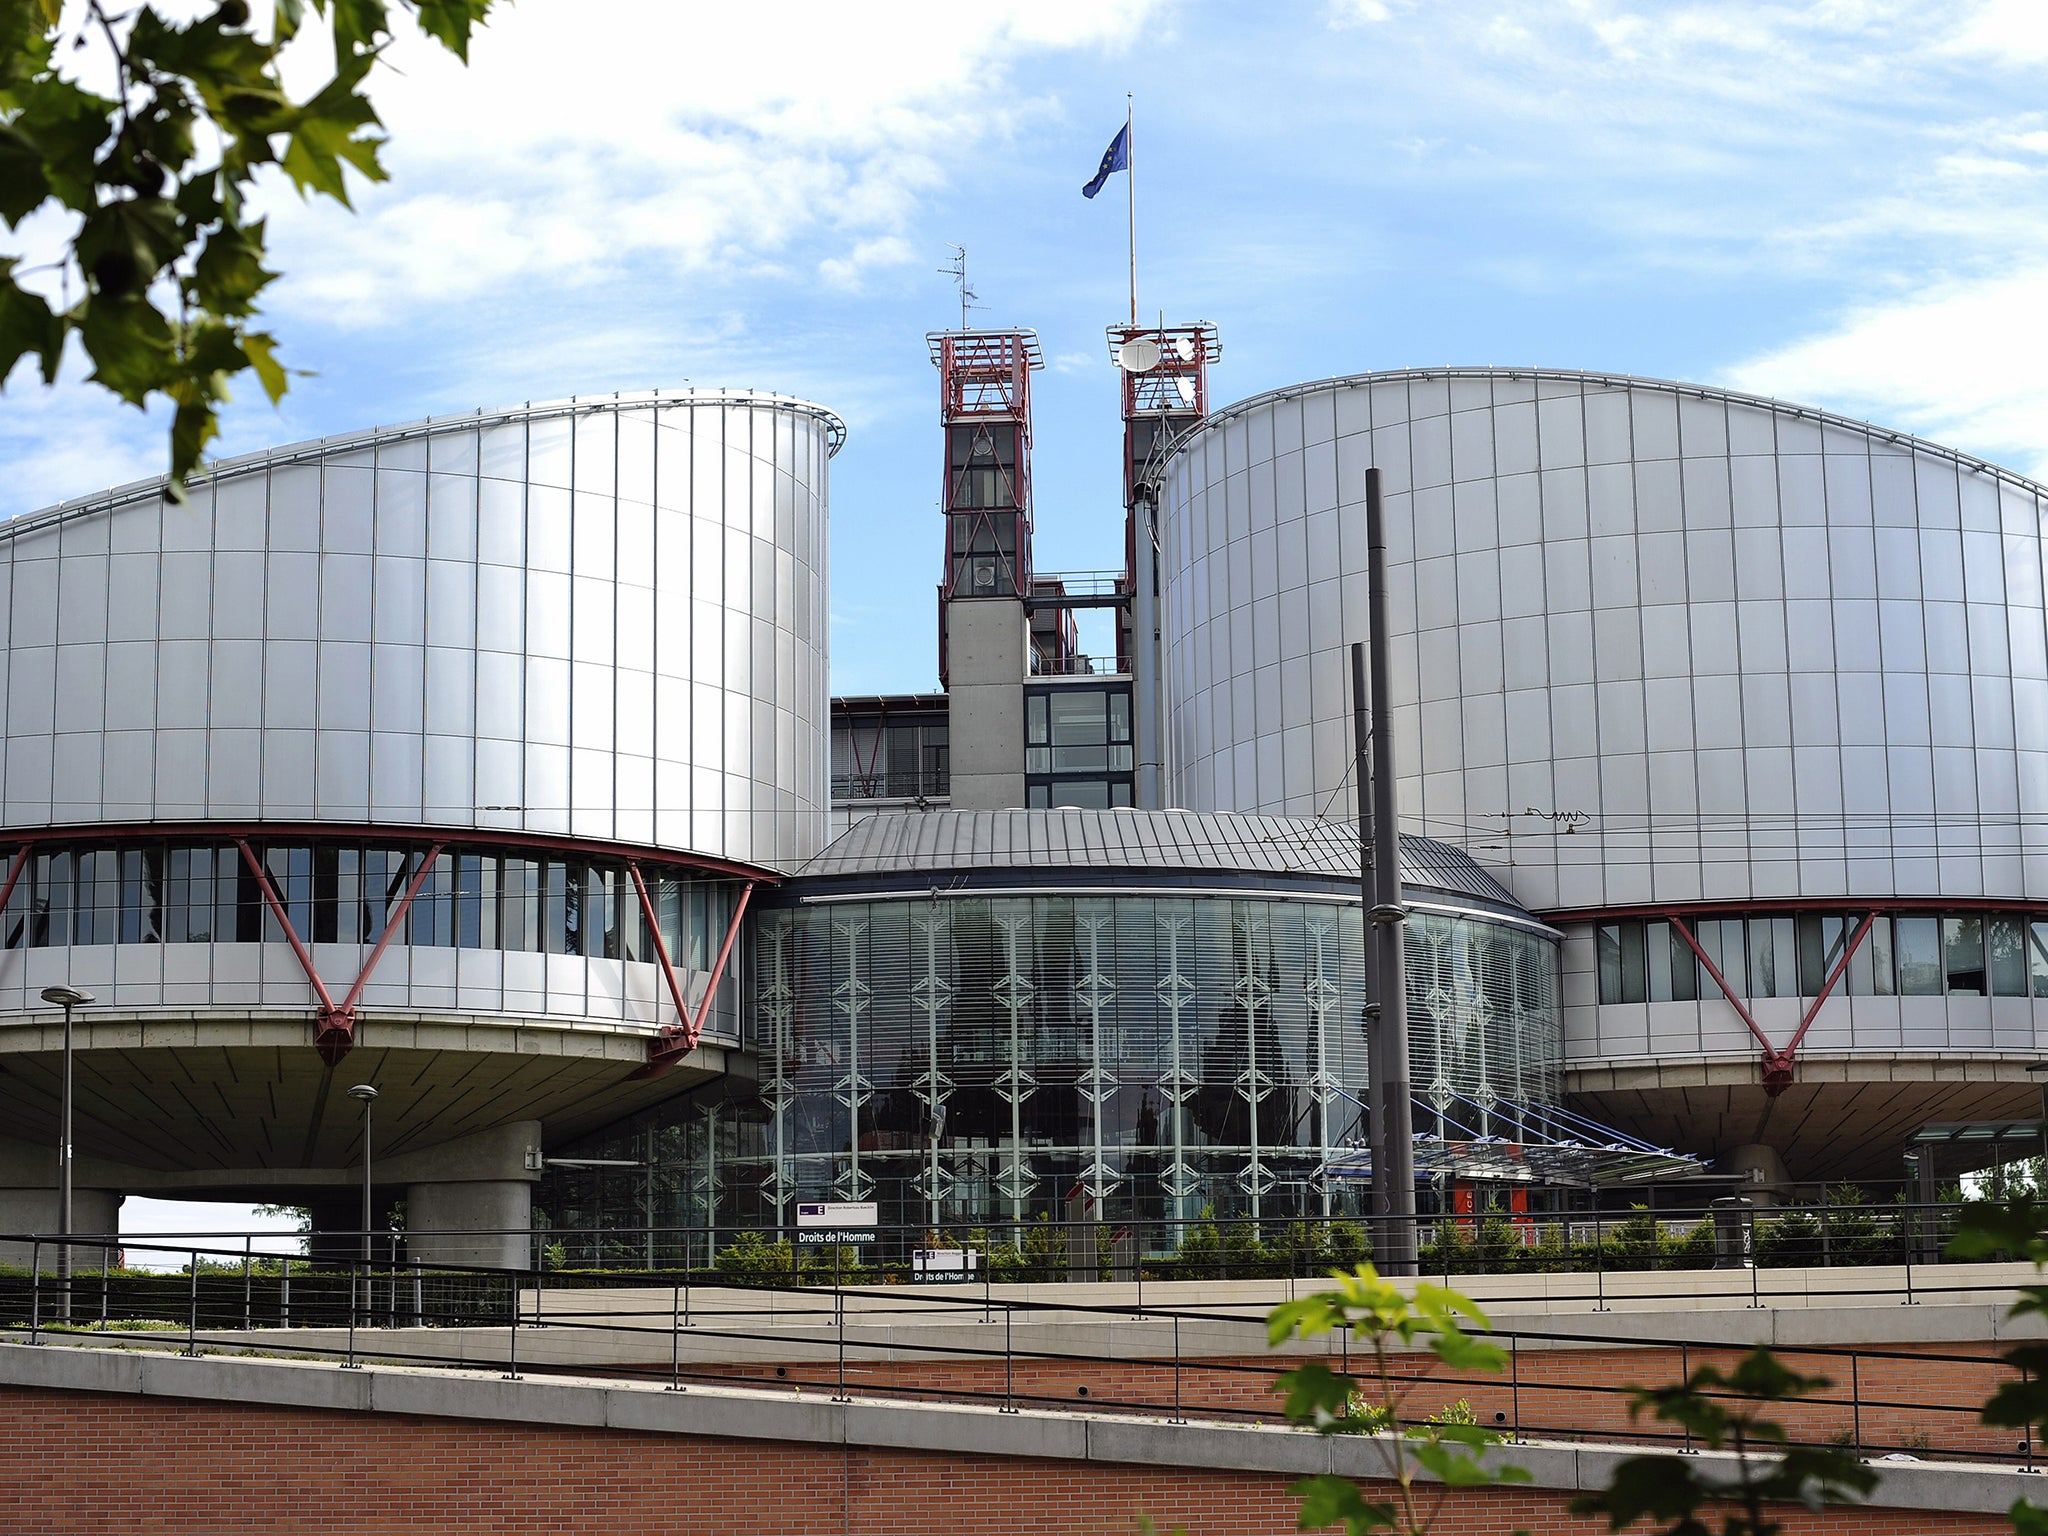 The European Court of Human Rights in Strasbourg